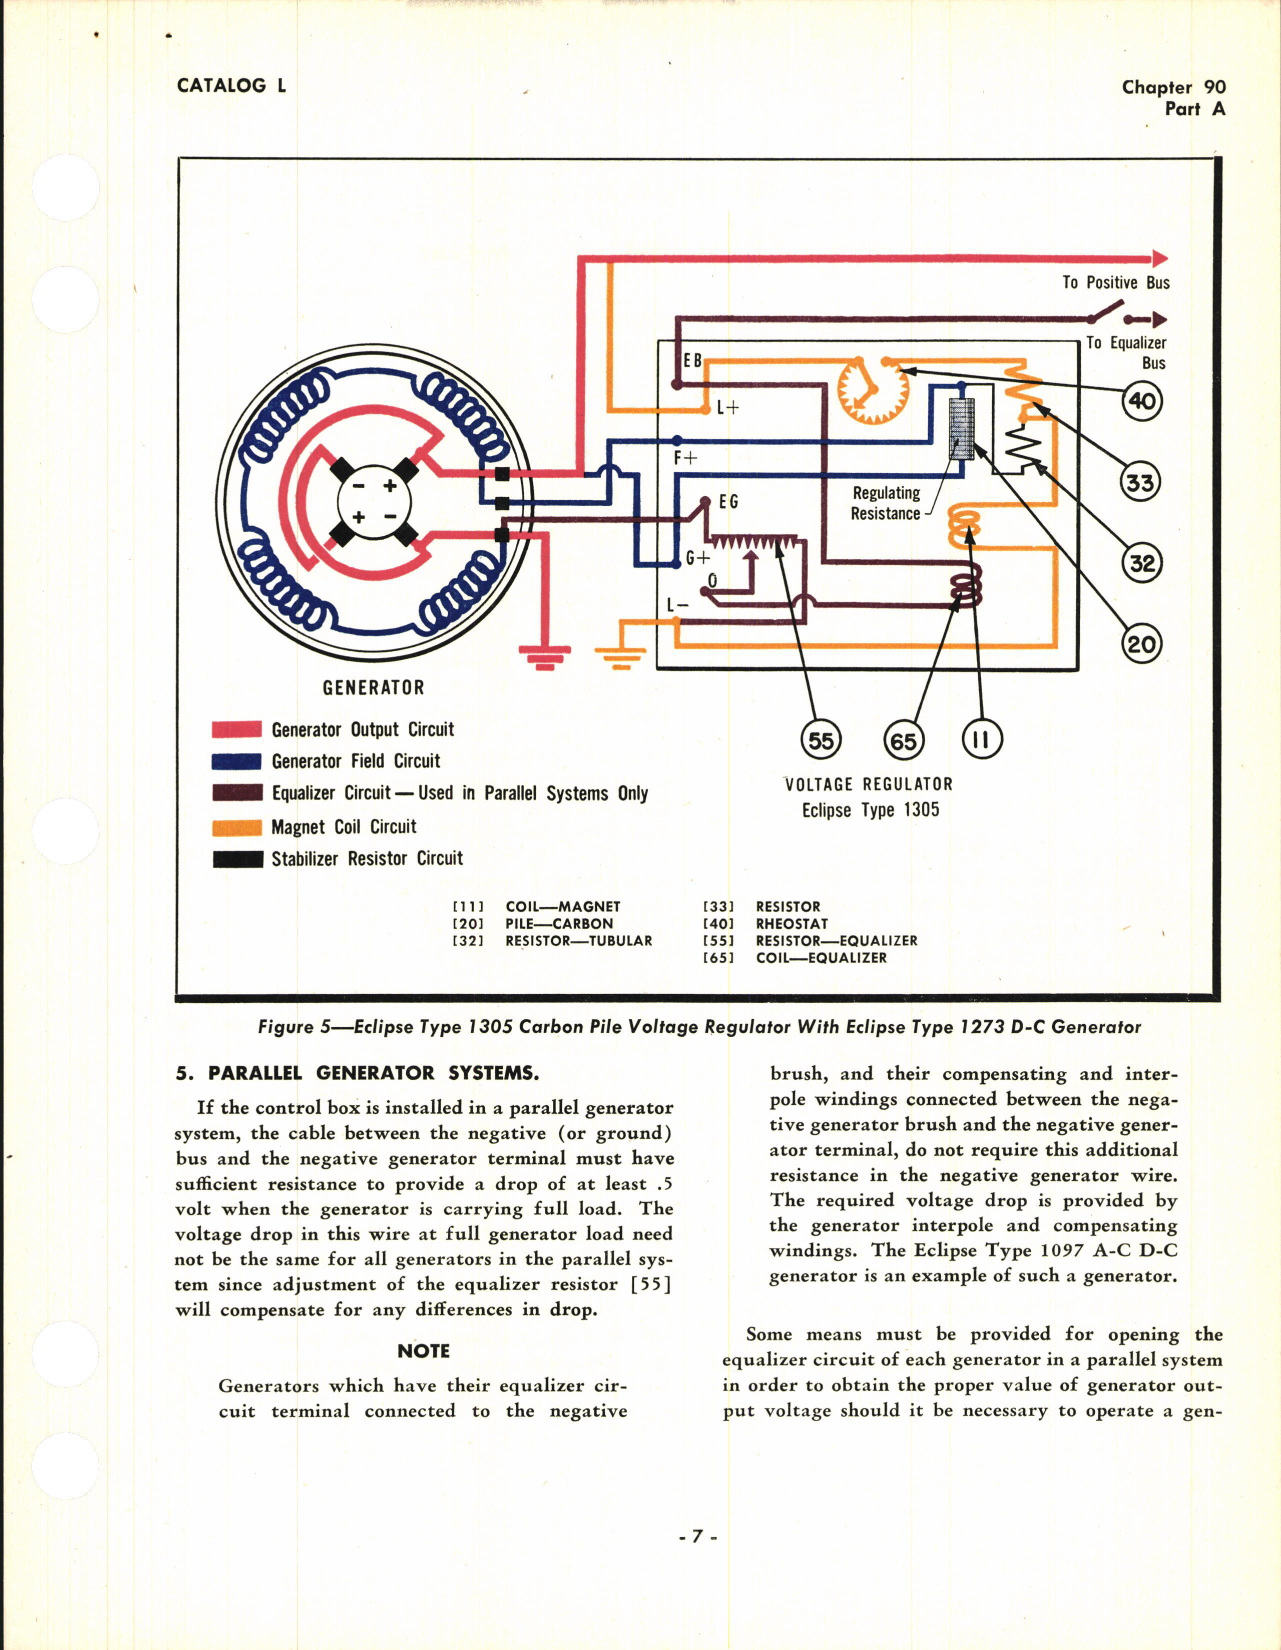 Sample page 7 from AirCorps Library document: Operating and Service Instructions for D-C Carbon Pile Voltage Regulator Control Box Type 1305, Model 1